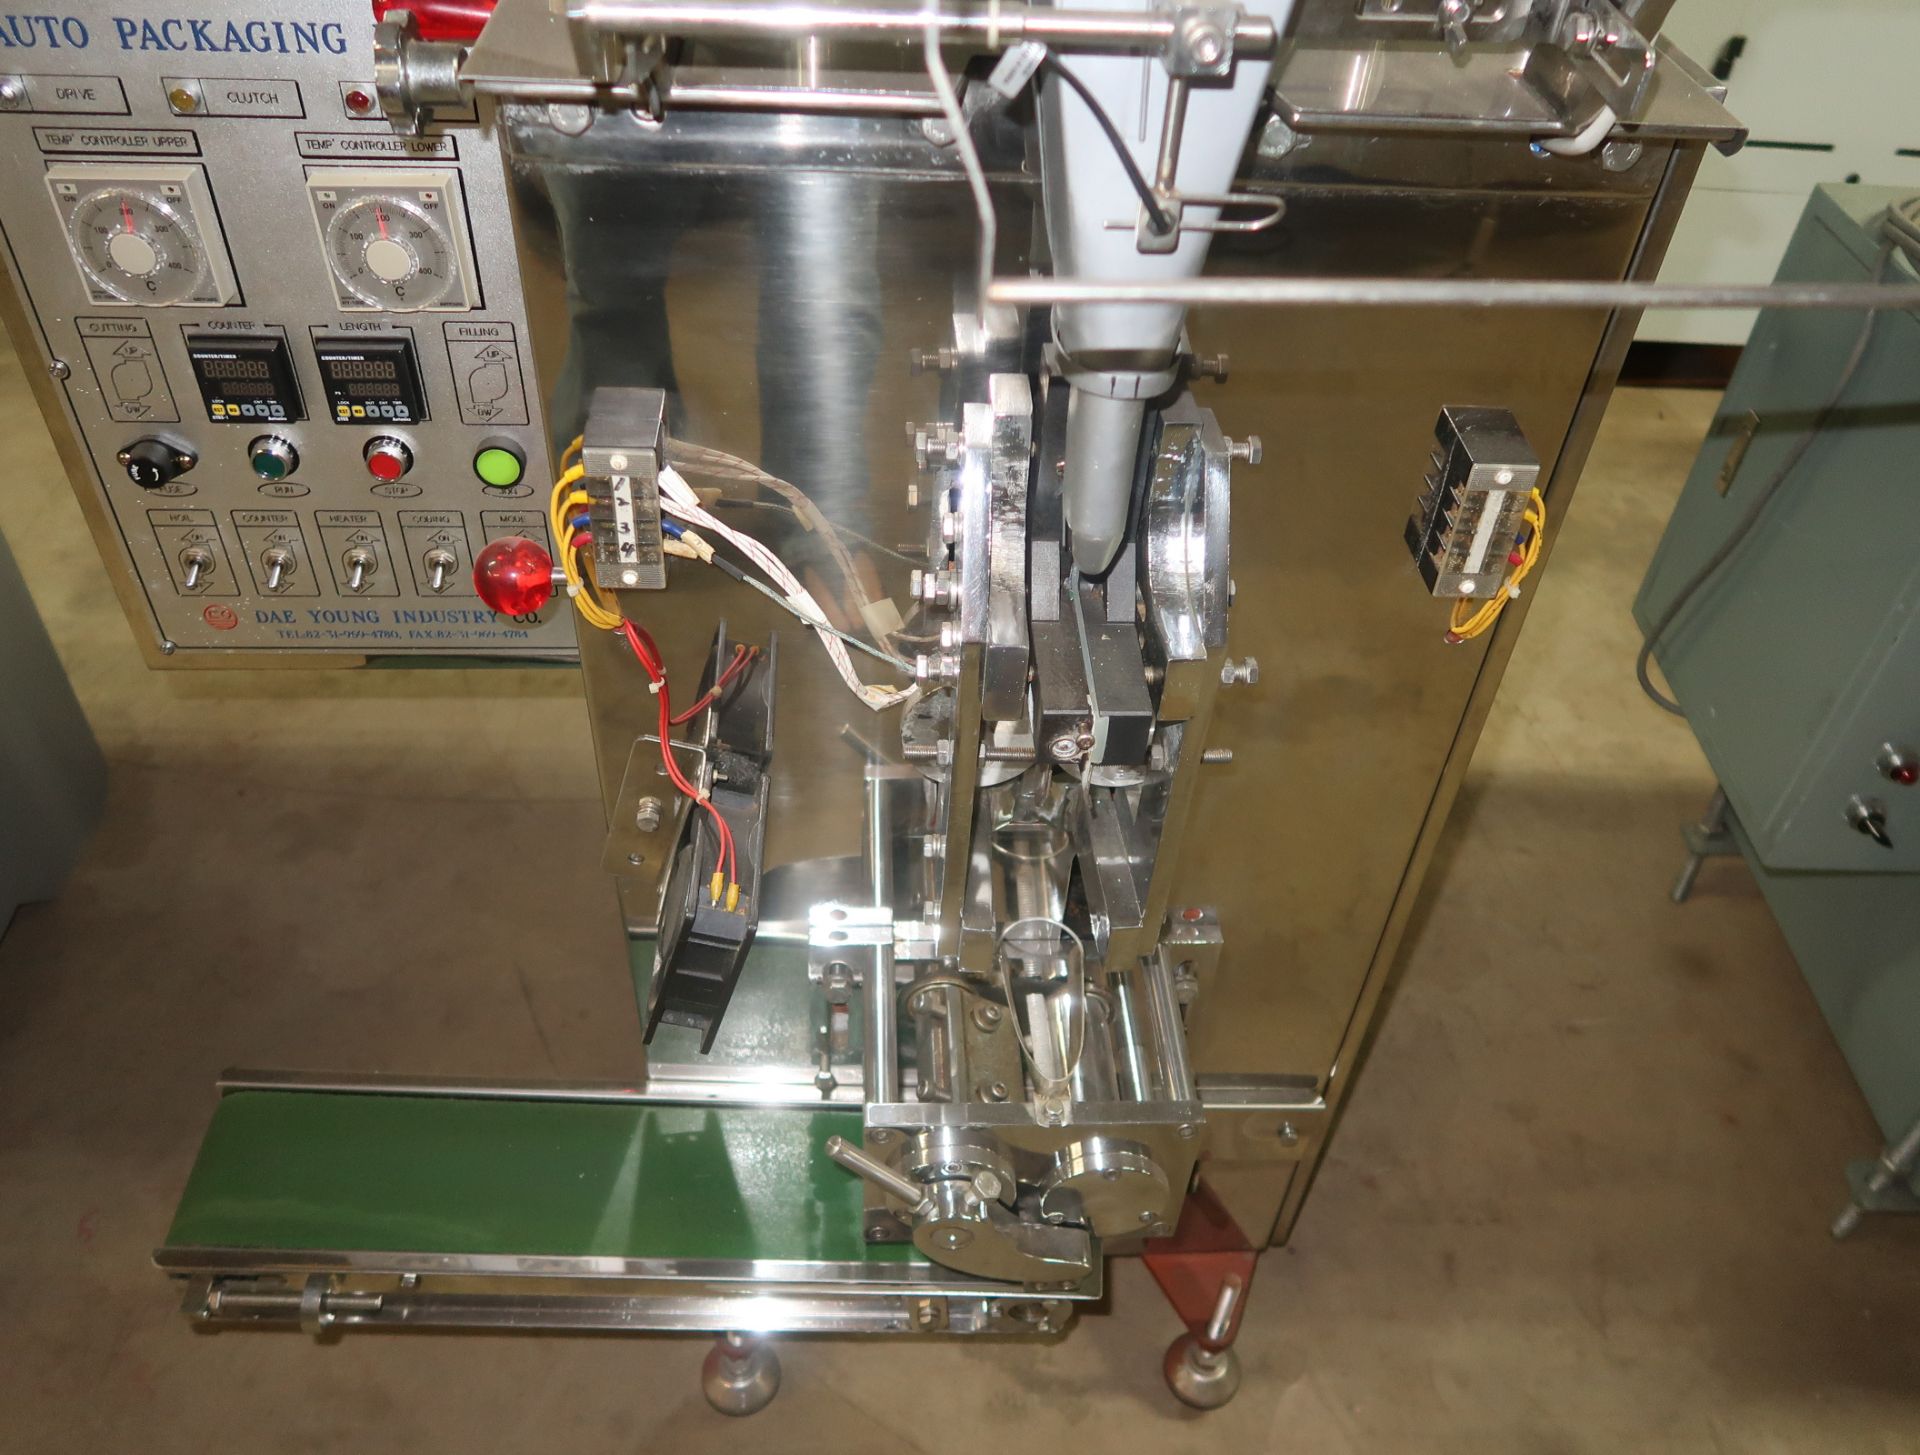 DEE YOUNG INDUSTRY CO AUTO PACKAGING M/C, COFFEE BAGGER/FILLER - Image 3 of 5